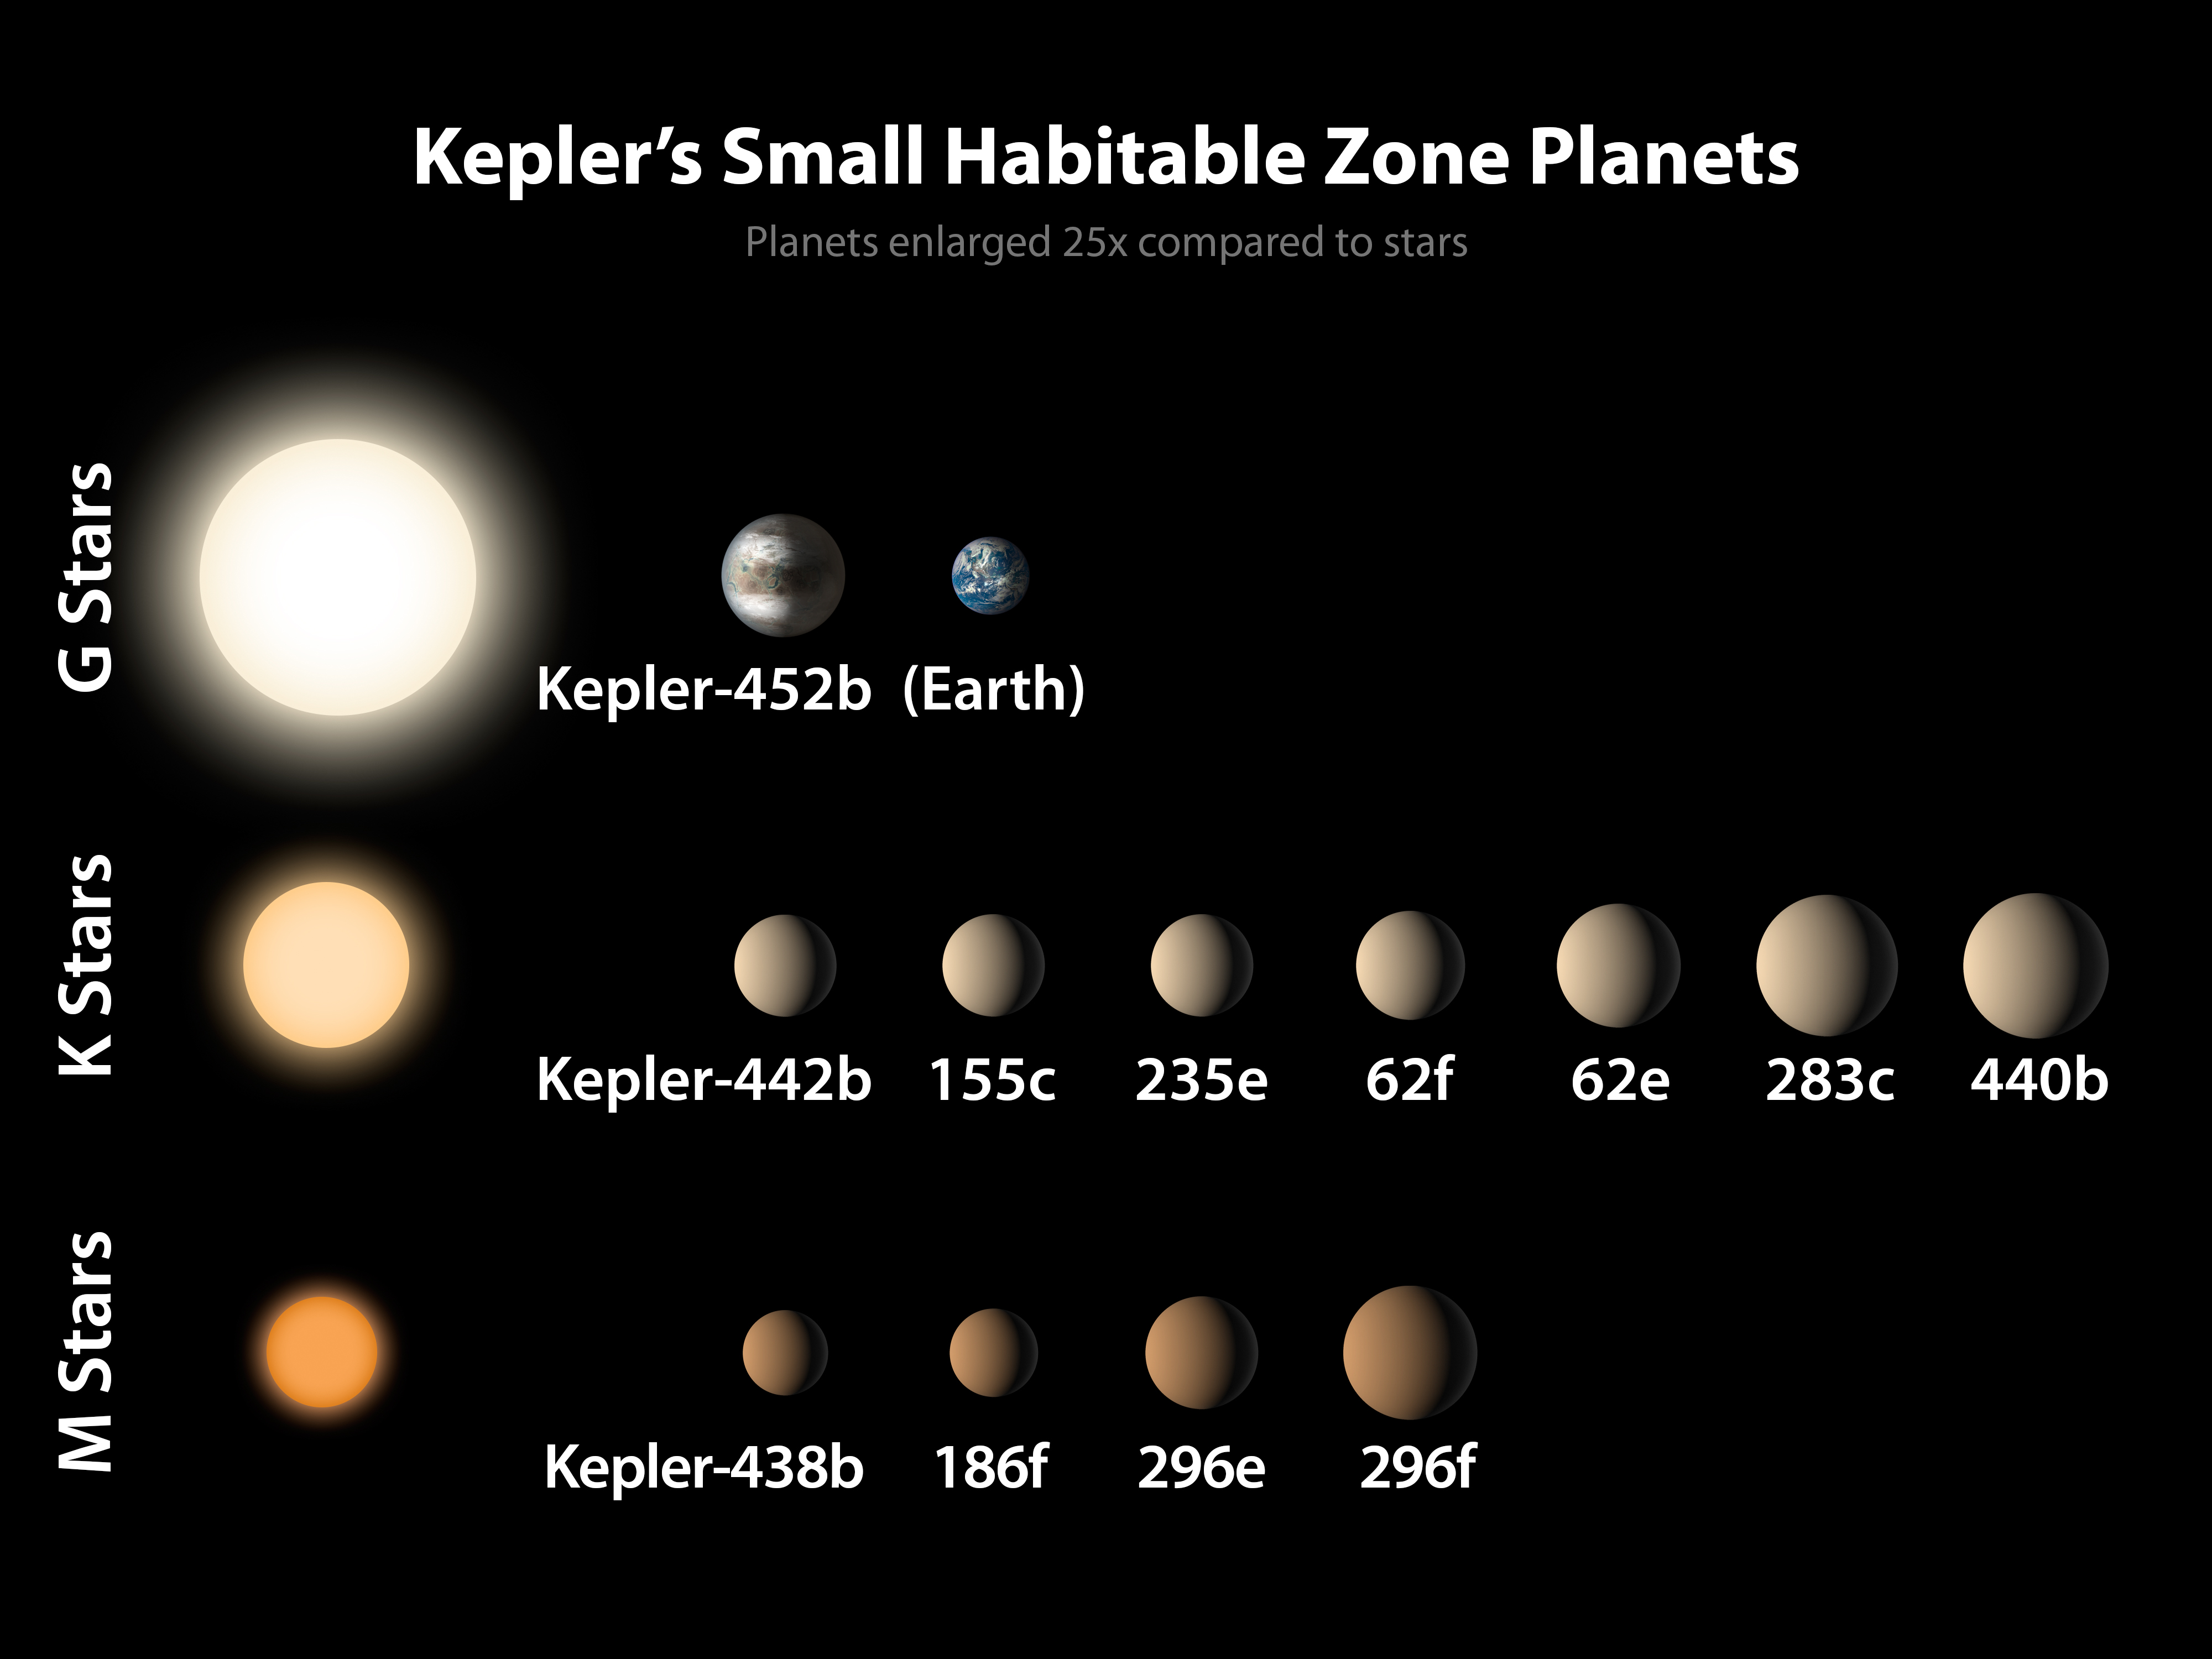 In this diagram, the sizes of the exoplanets are represented by the size of each sphere